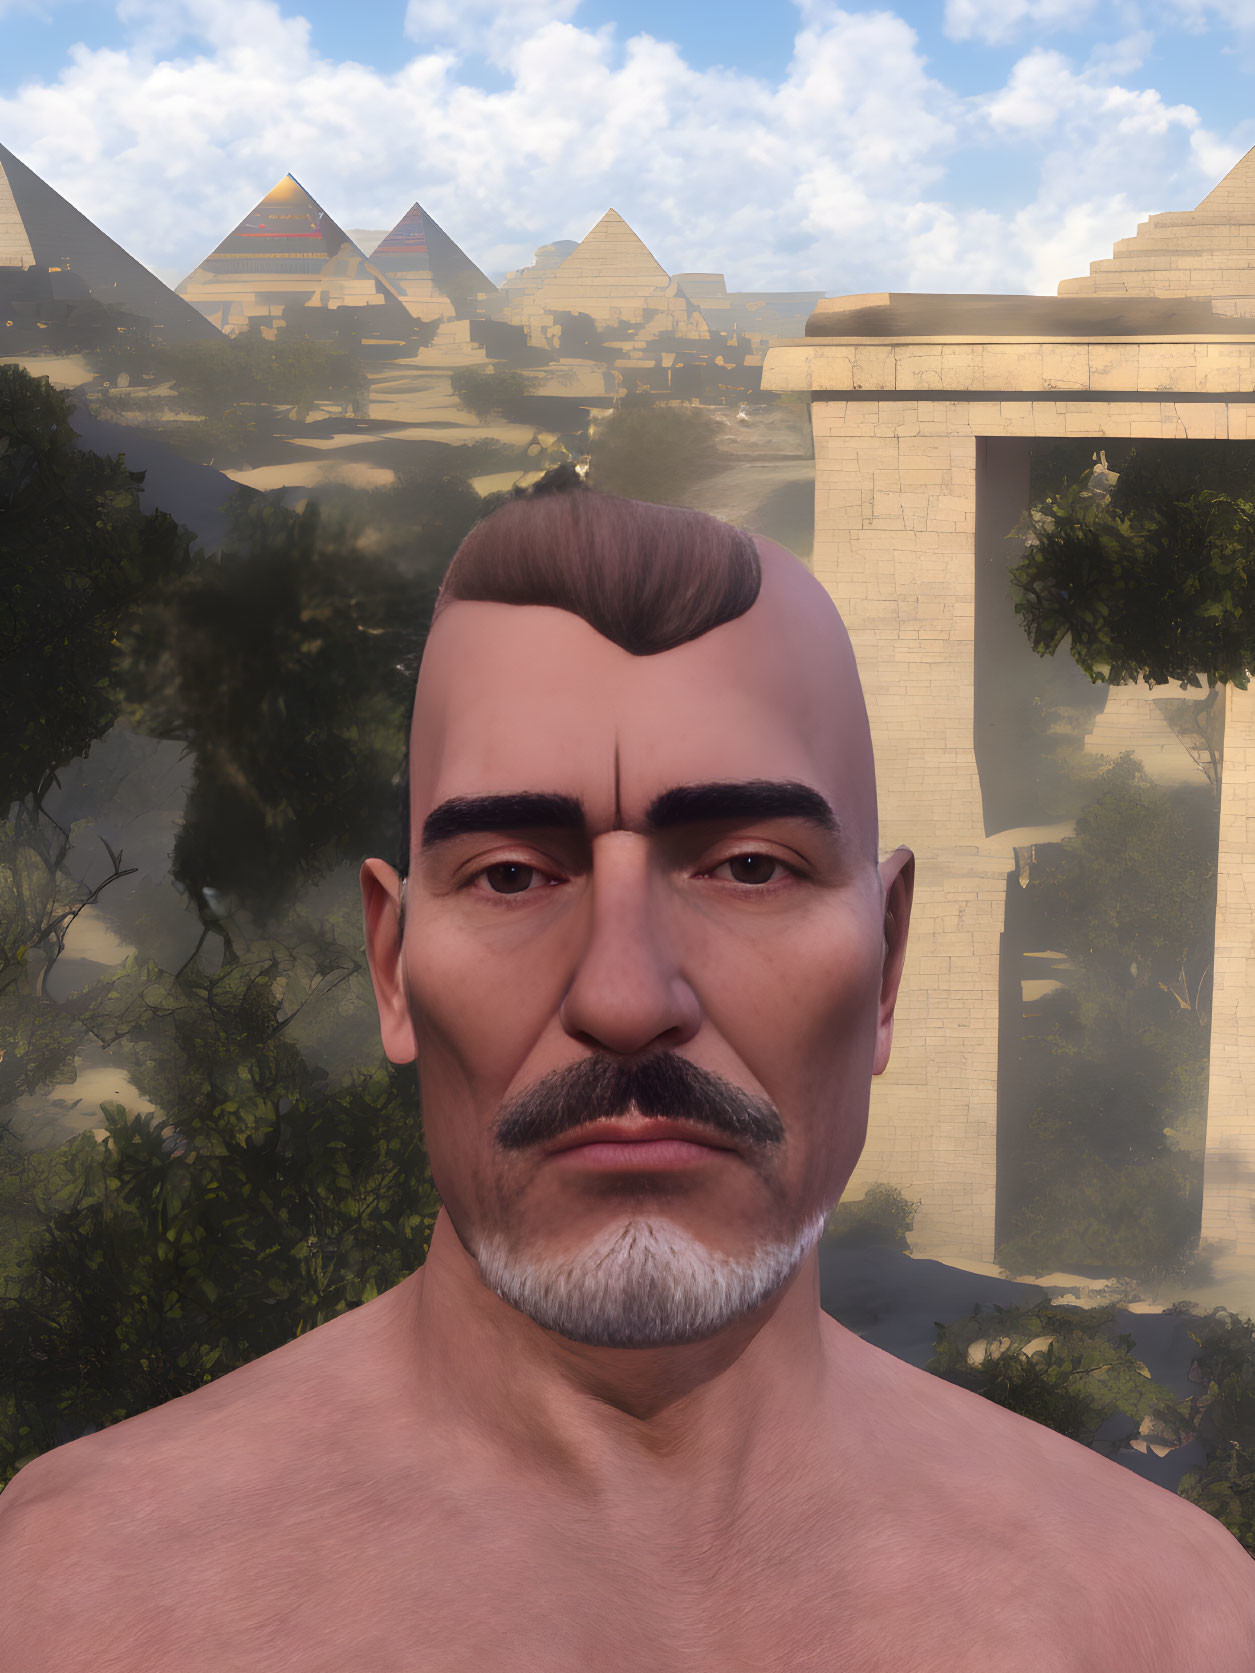 3D-rendered bald male figure with mustache and pyramids backdrop